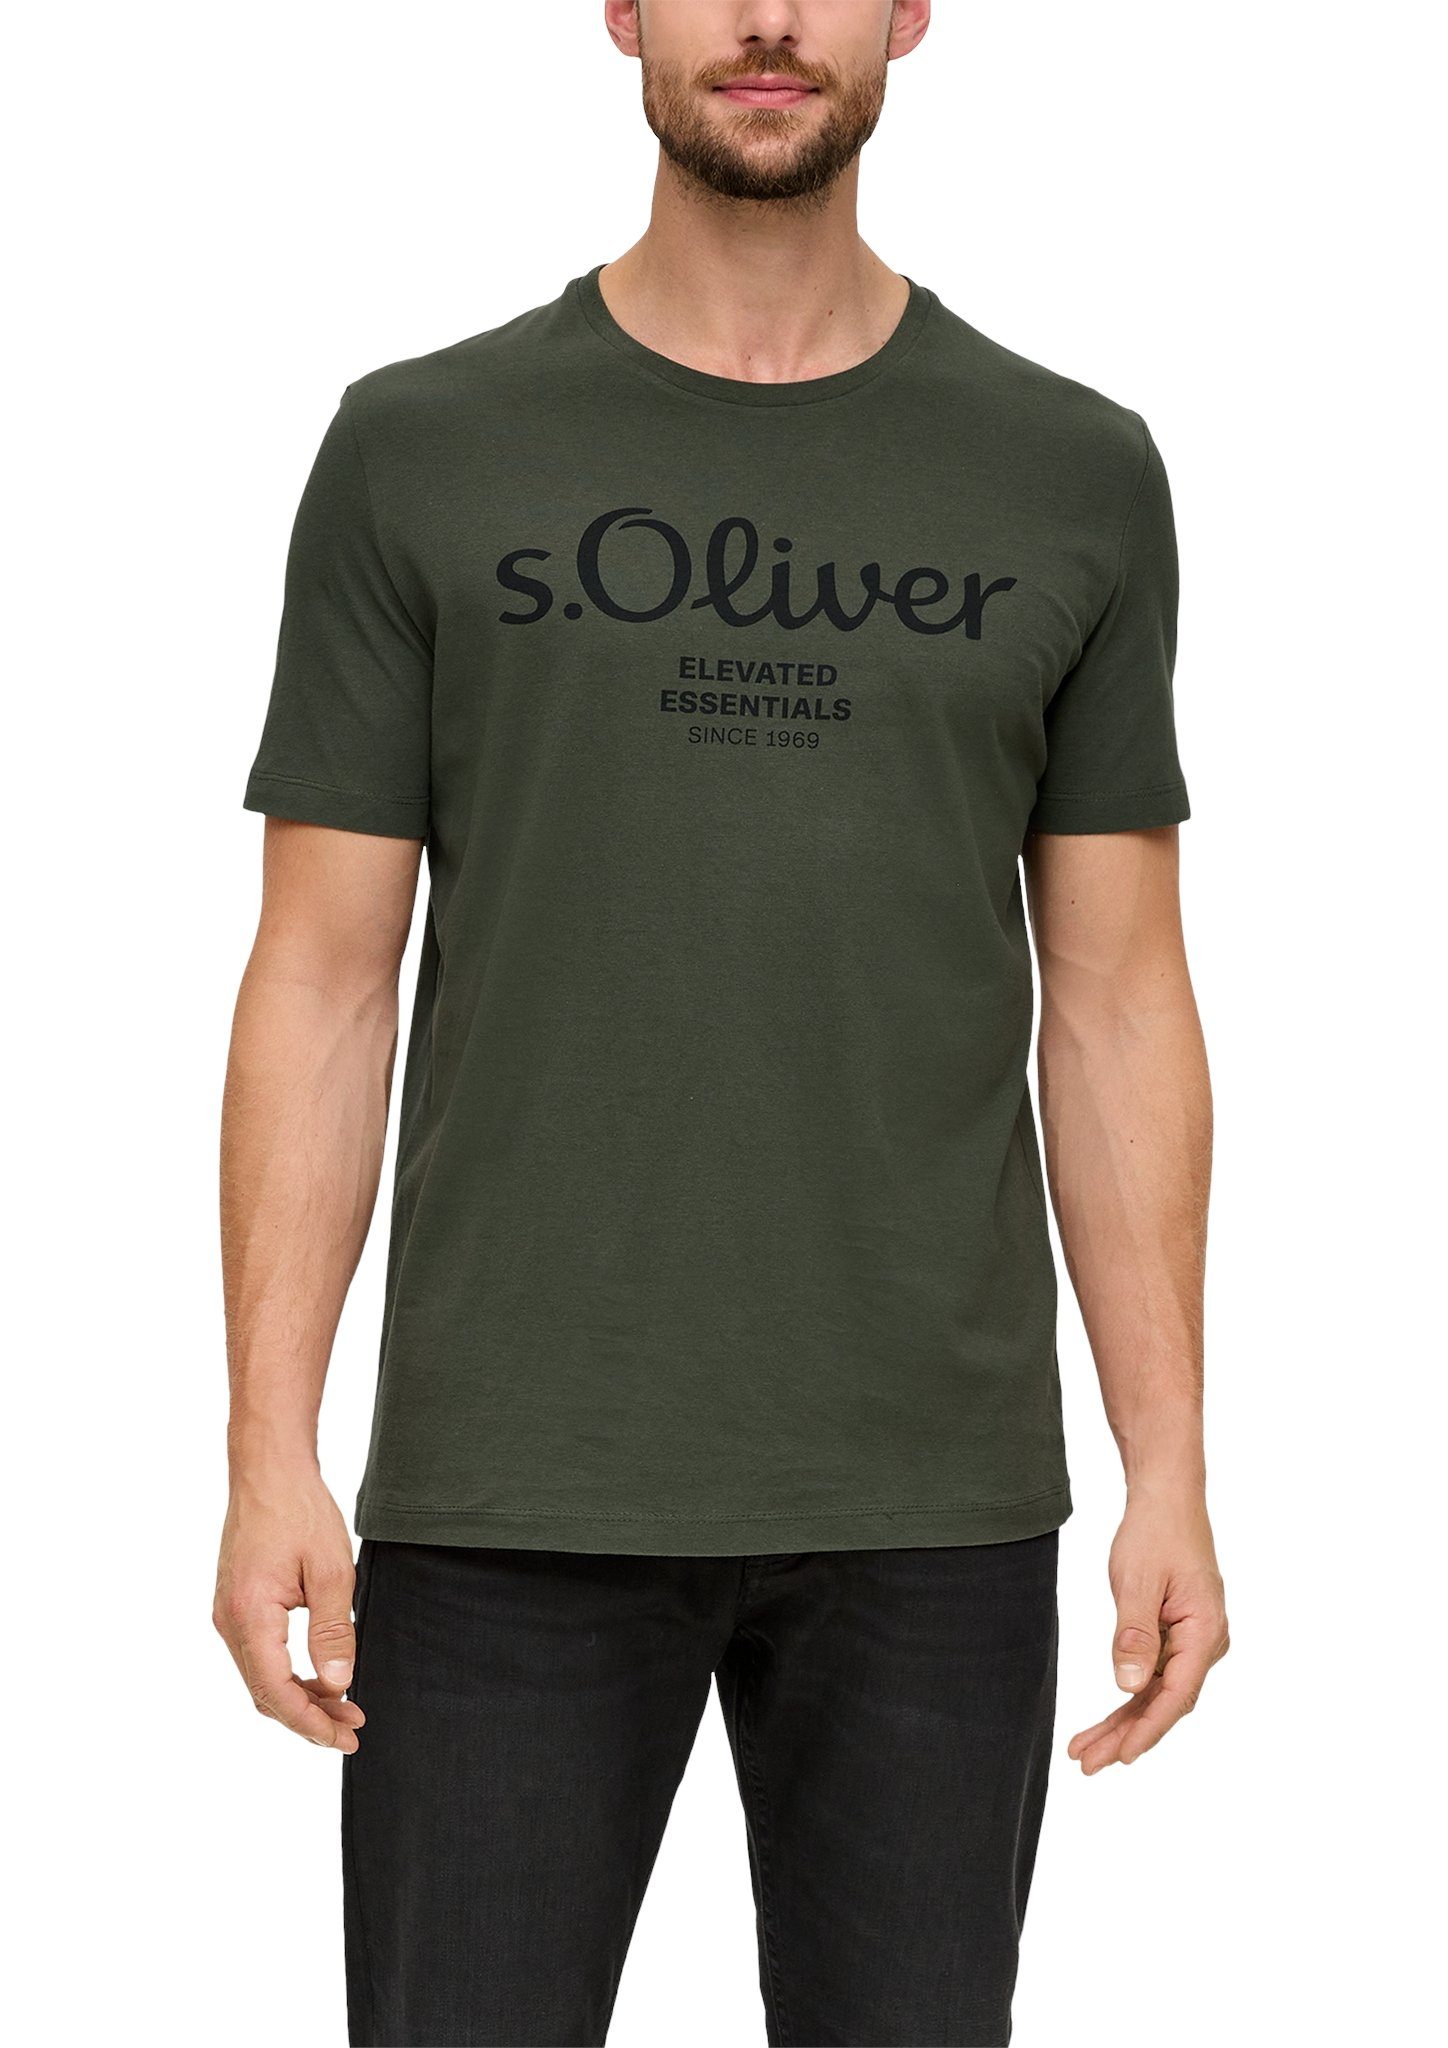 s.Oliver T-Shirt im sportiven Look green